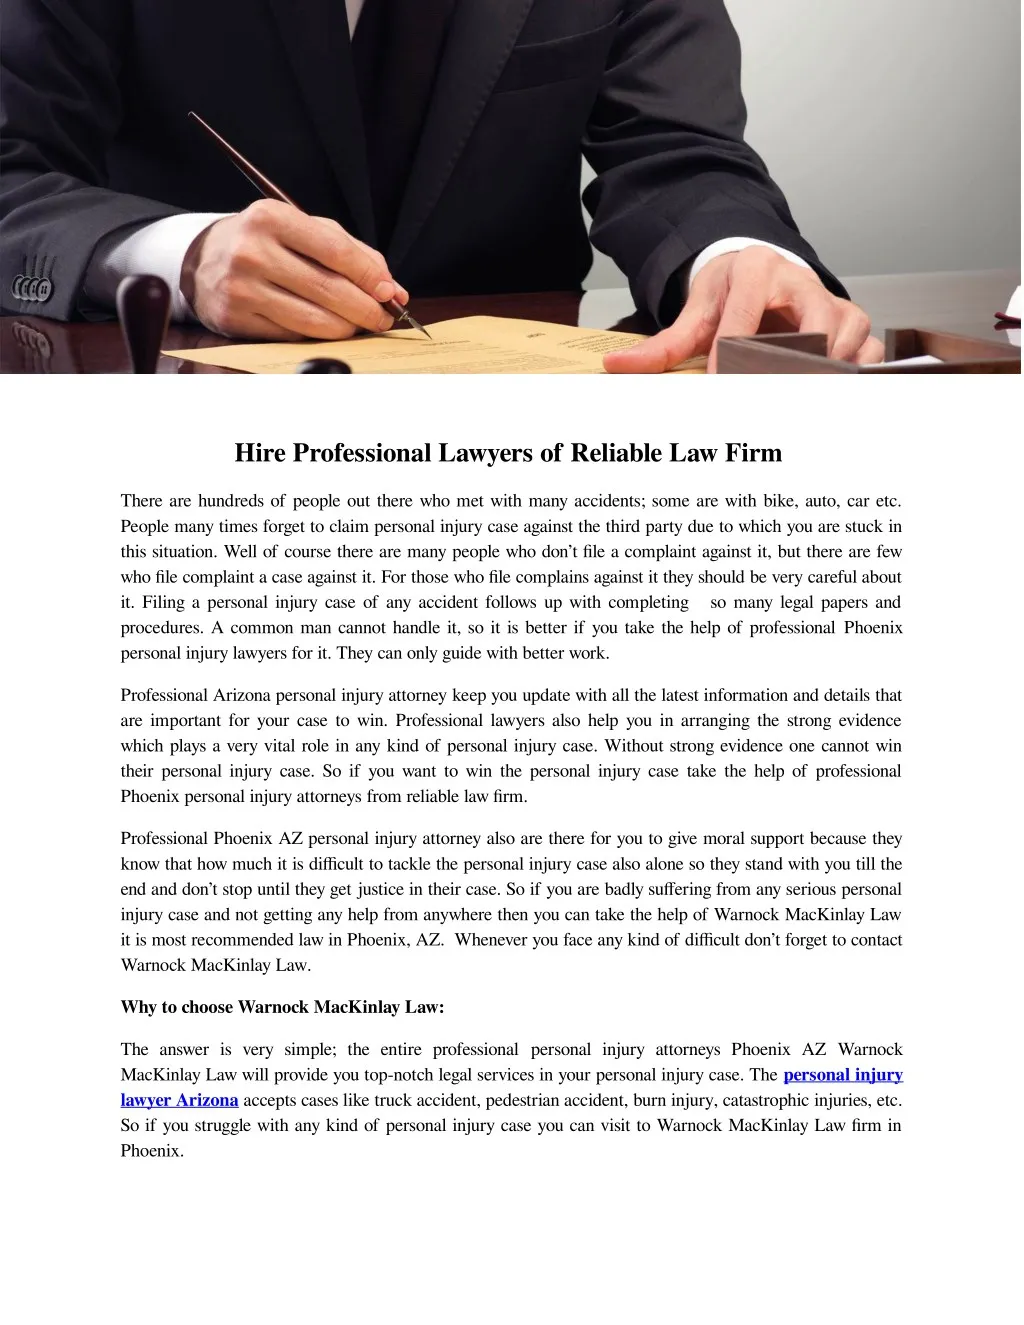 hire professional lawyers of reliable law firm